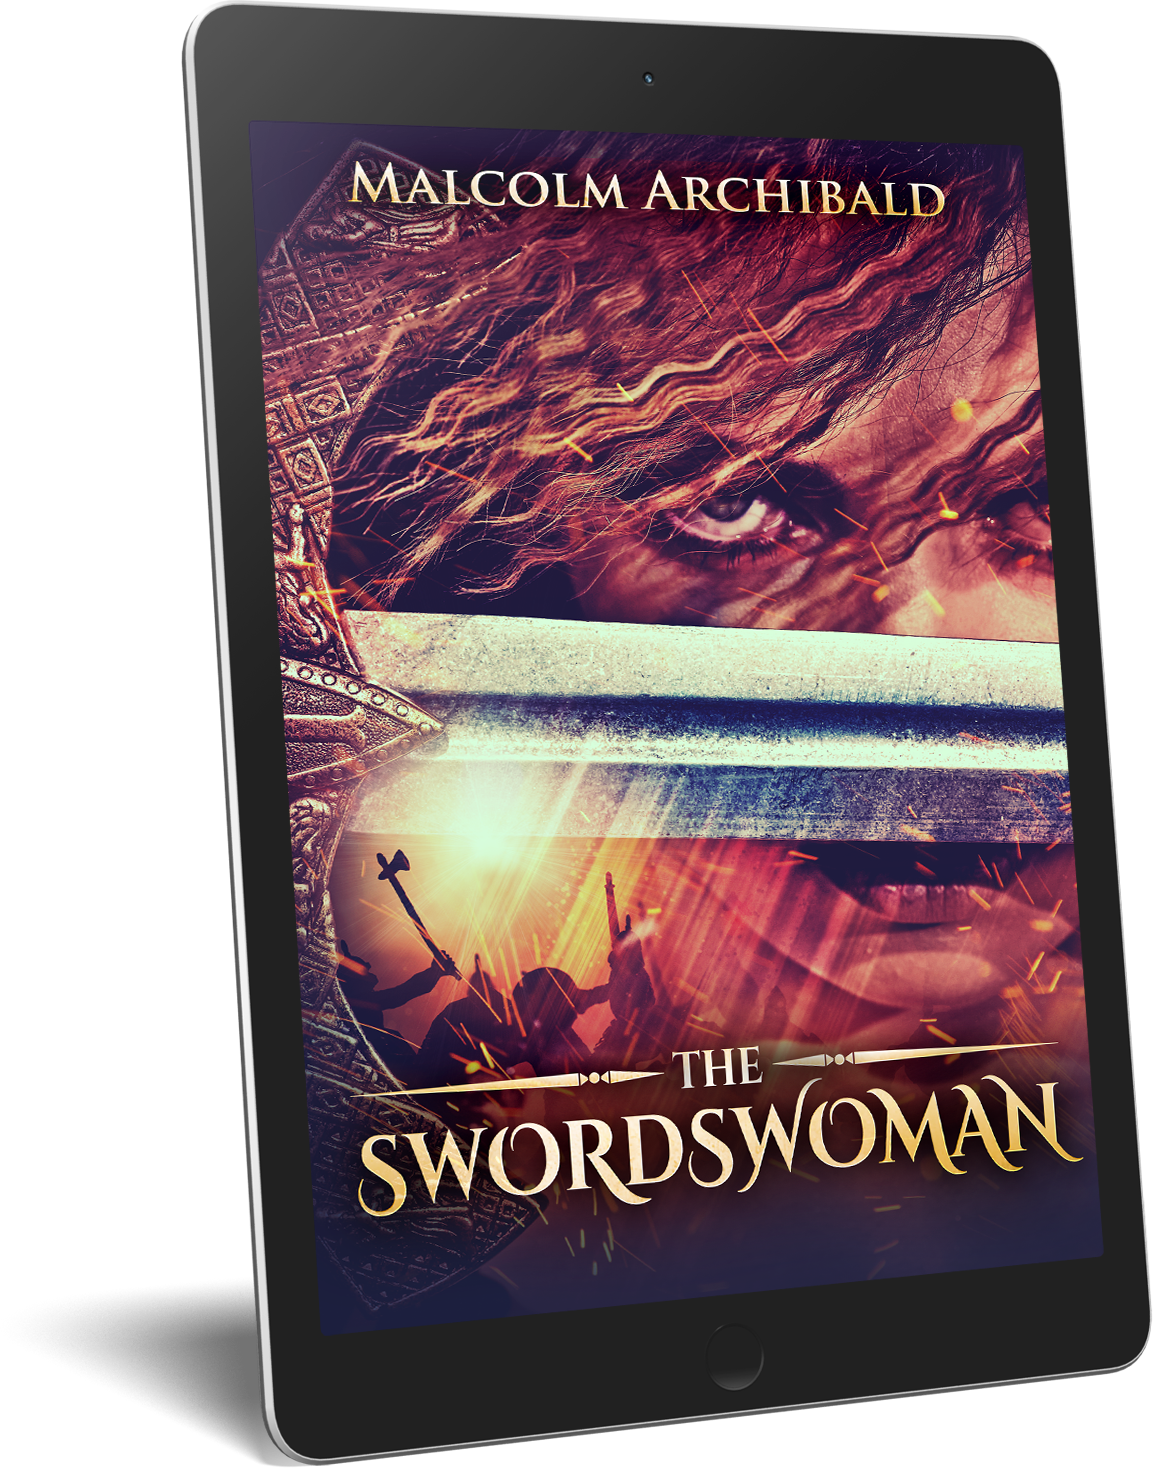 FREE: The Swordswoman by Malcolm Archibald